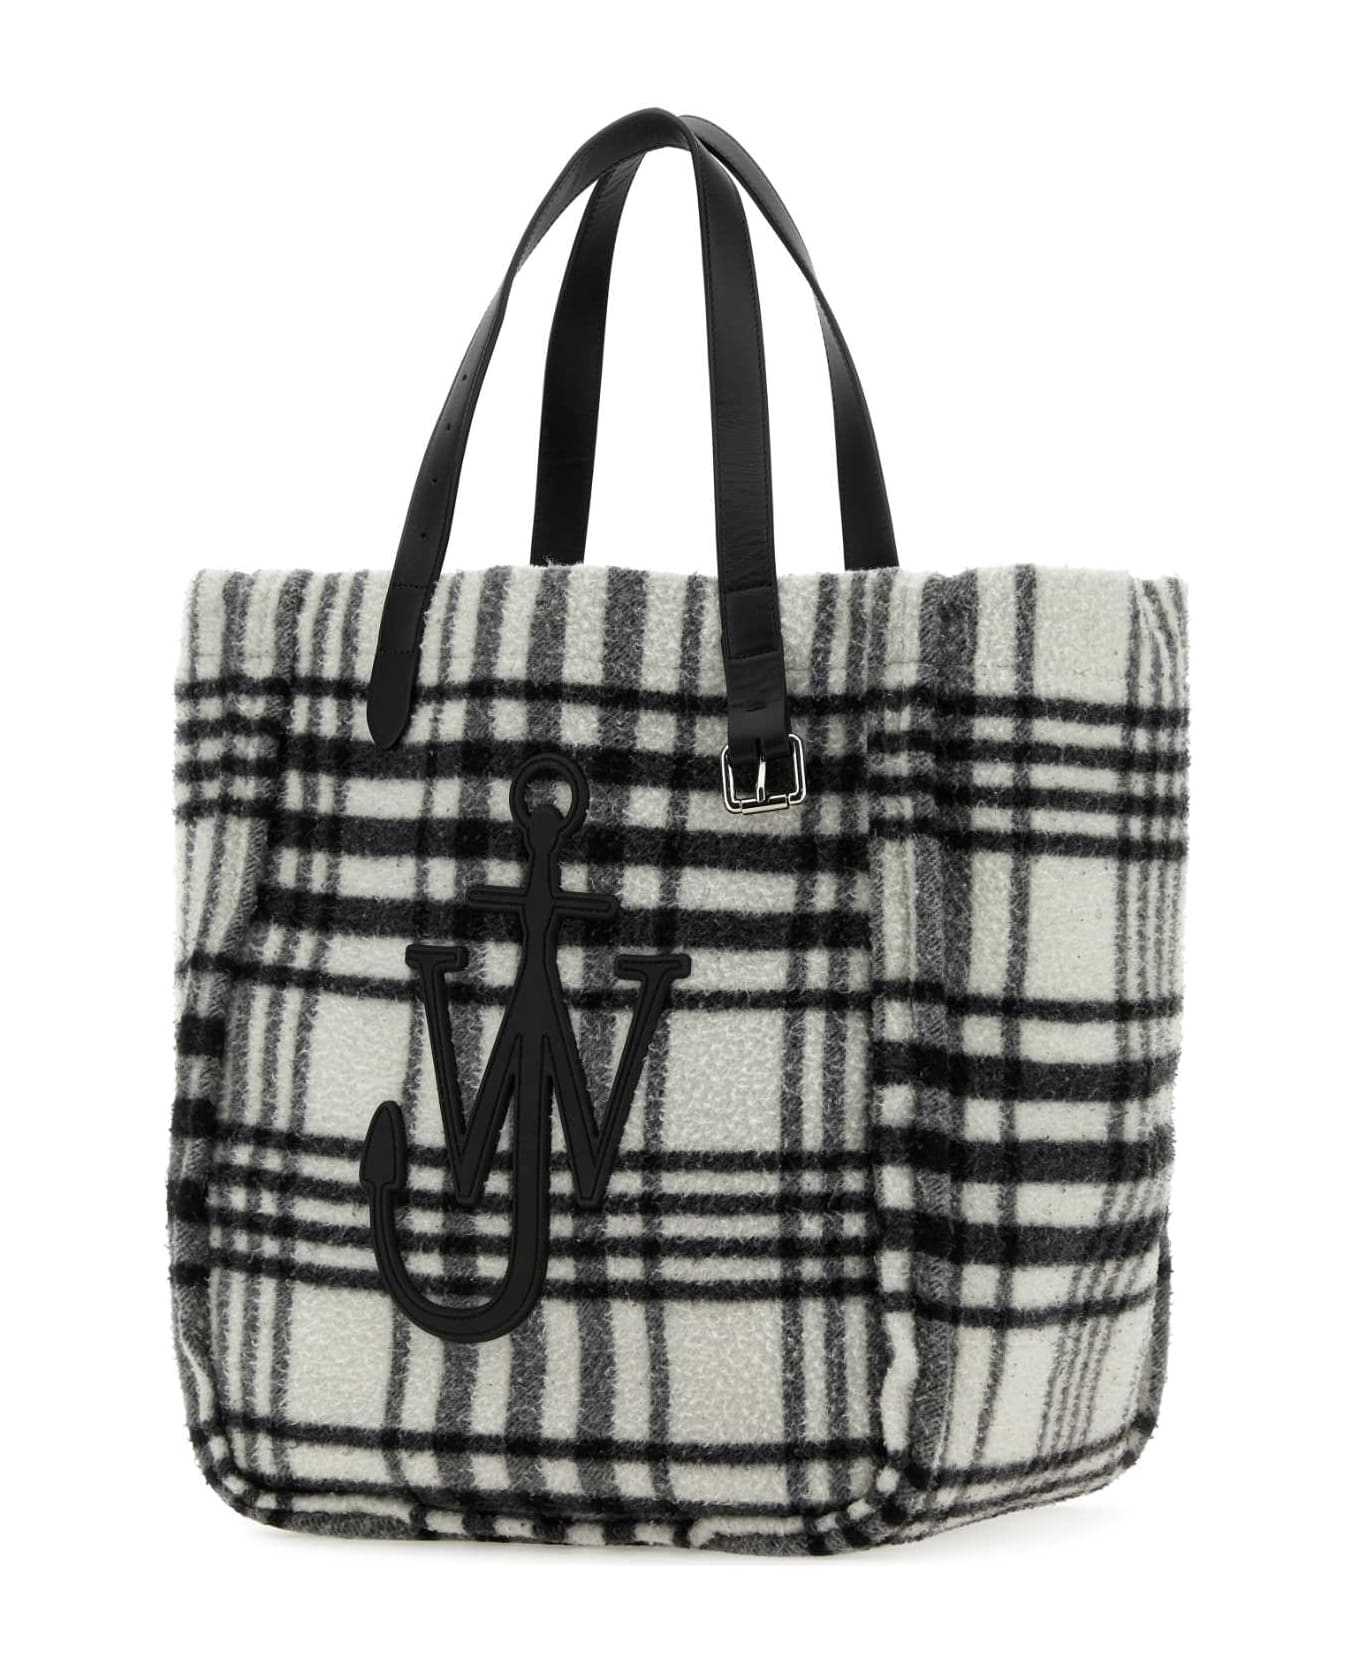 J.W. Anderson Embroidered Fabric Shopping Bag - BLACKWHITE